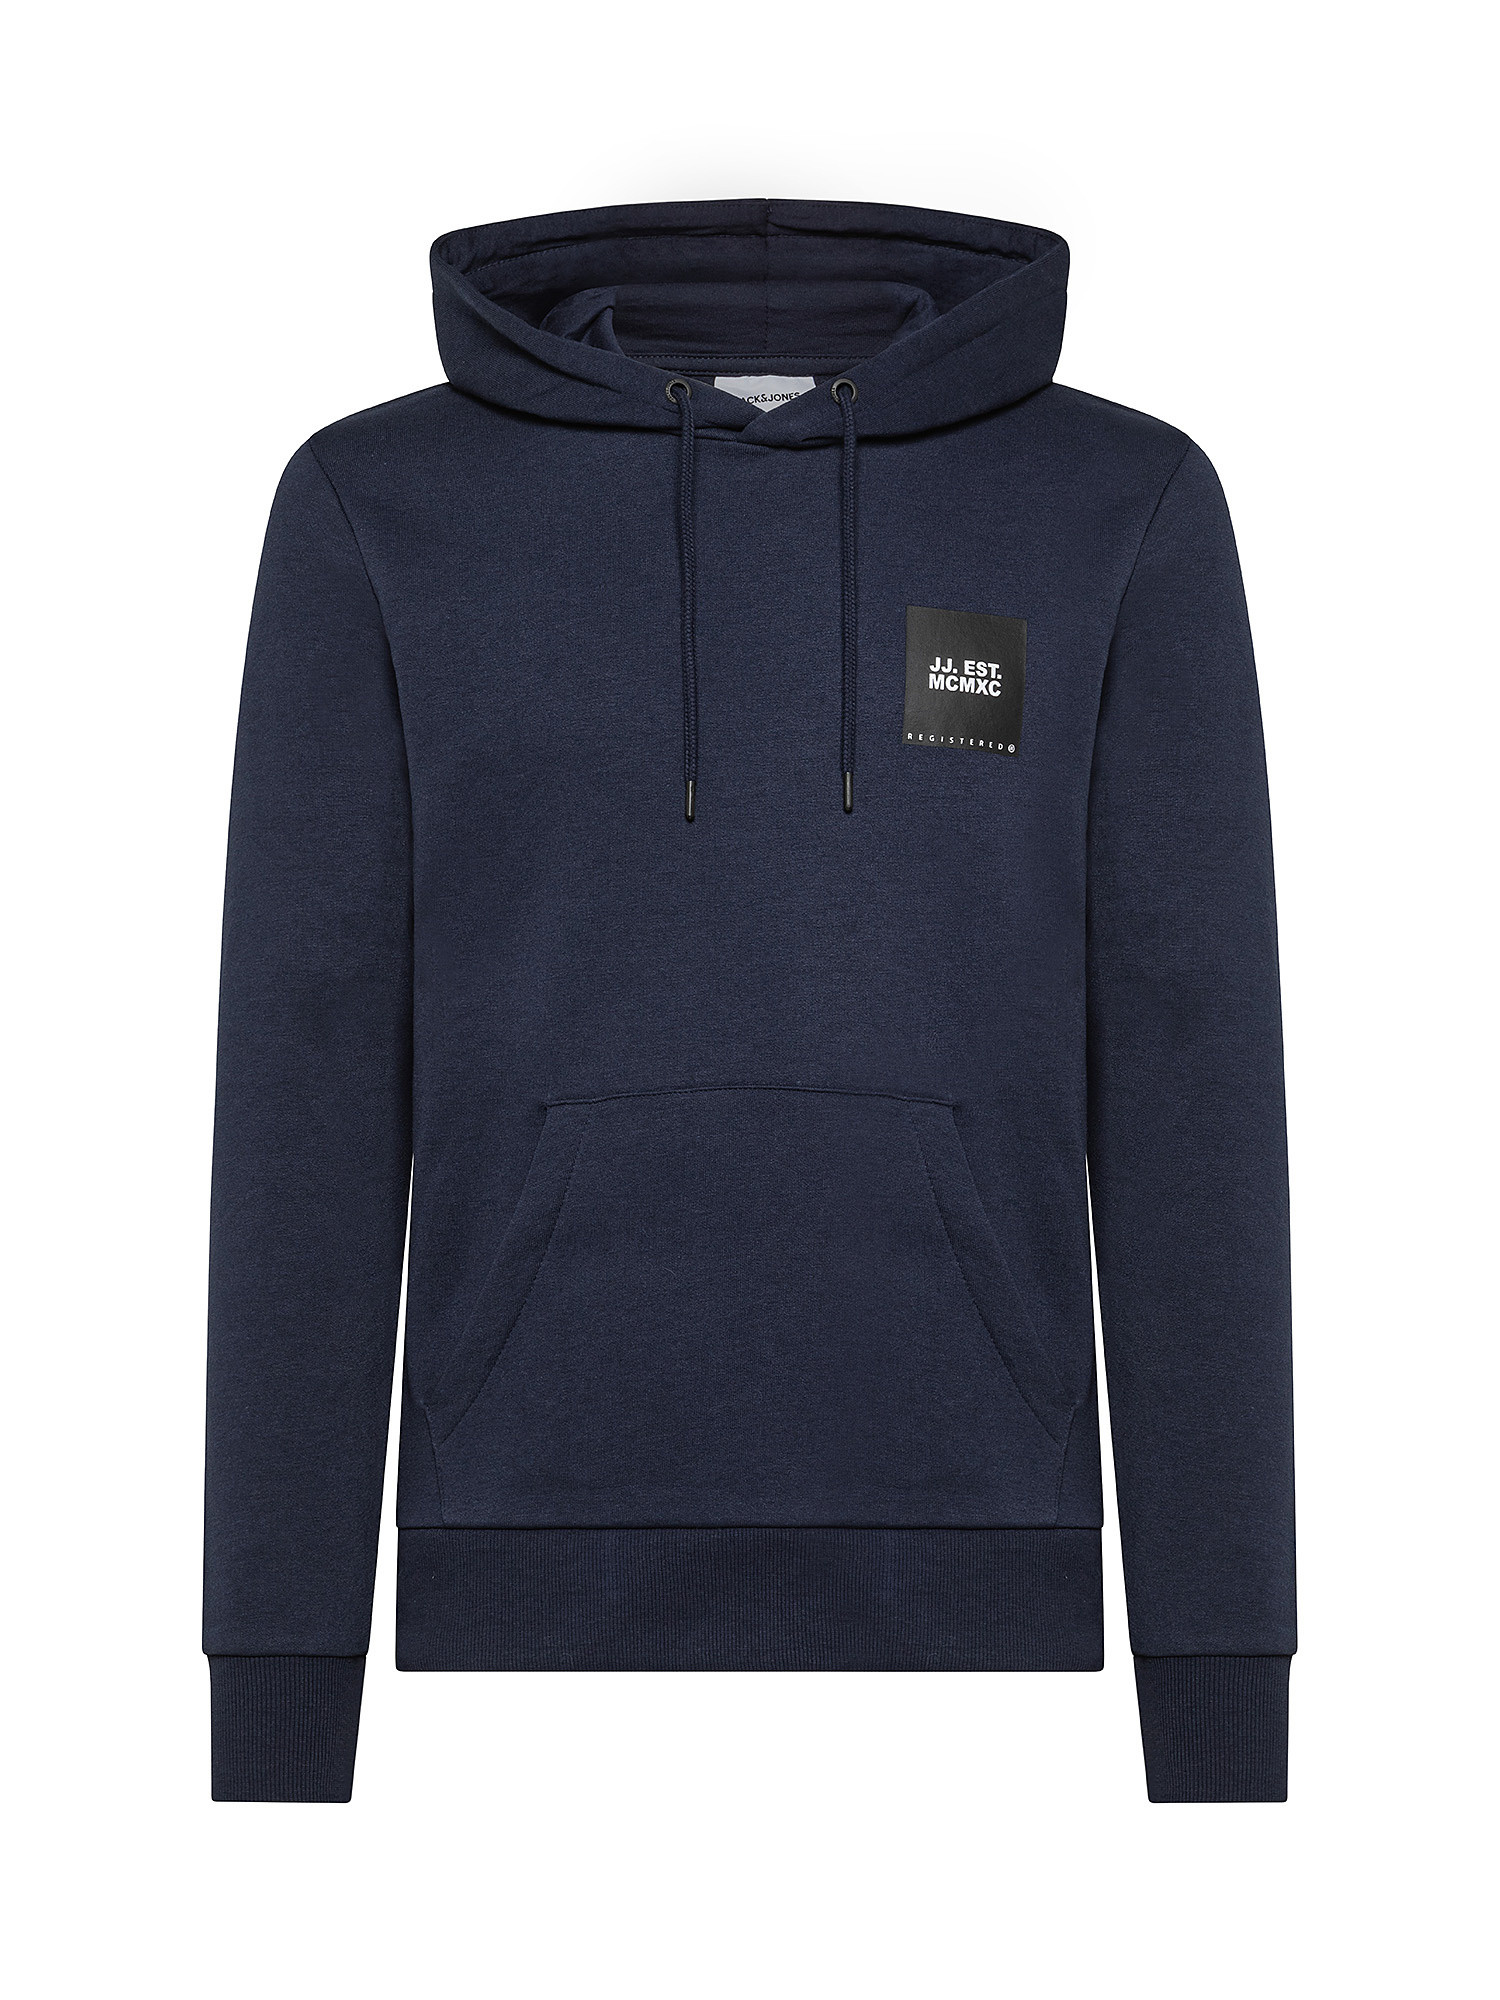 Sweatshirt with hood and long sleeves, Blue, large image number 0